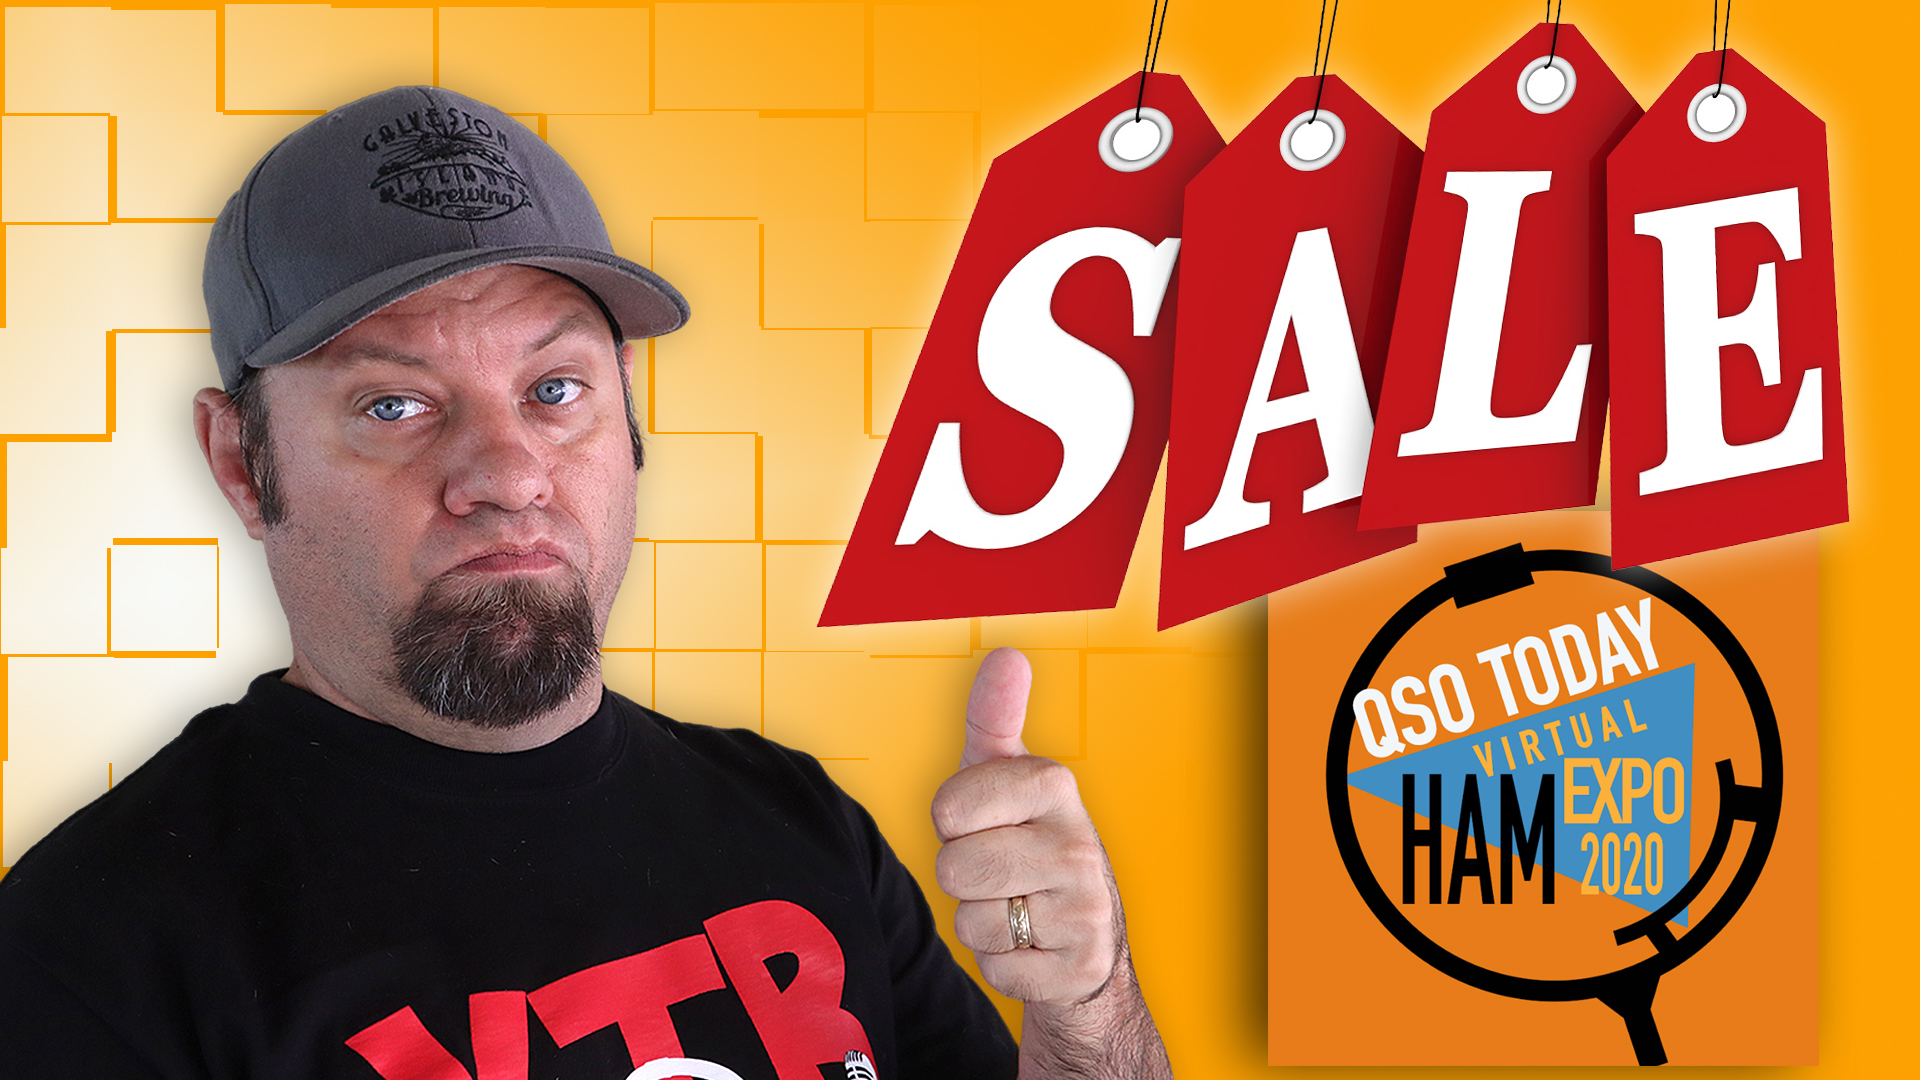 Episode 430: Ham Radio Shopping Deals for QSO Today Virtual Hamfest Weekend!